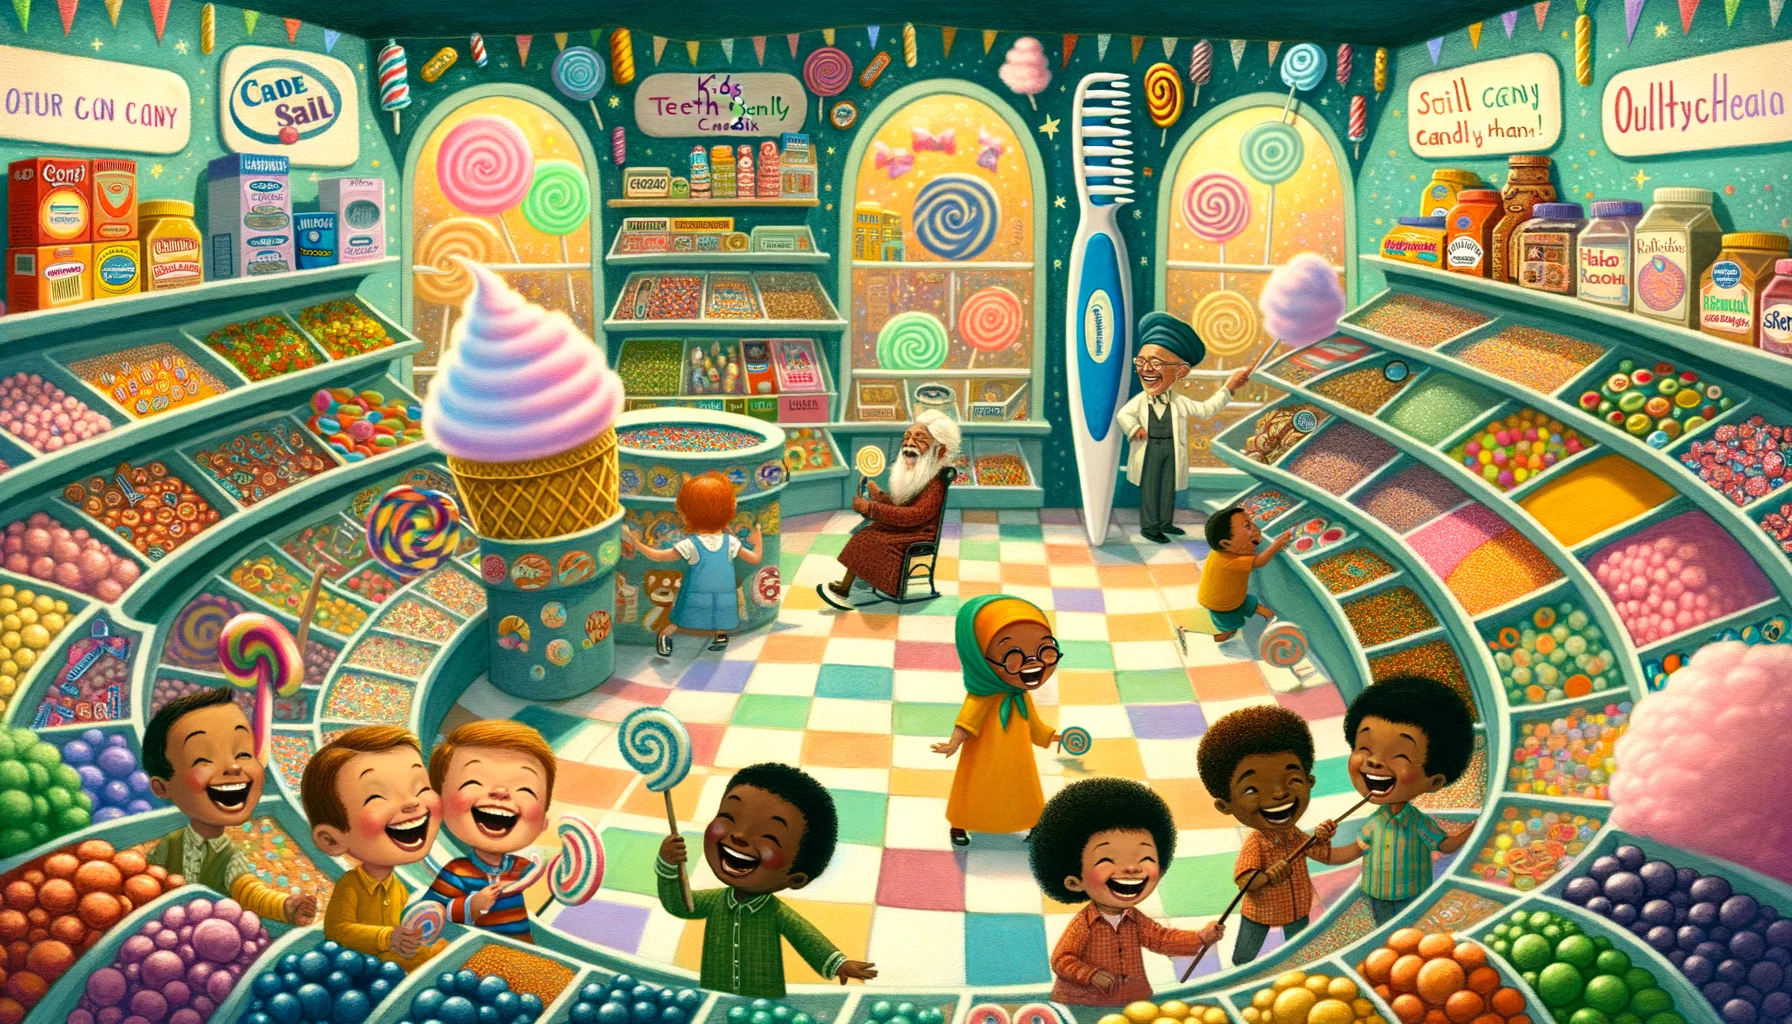 Imagine yourself in a whimsical candy store overflowing with varieties of kids' teeth-friendly candies! The sweets come in vibrant colors and intriguing shapes that pique everyone's curiosity but still ensure dental health. One corner of the store features a huge toothbrush as a symbol of oral hygiene. Children of various descents: Caucasian, Hispanic, Black, Middle-Eastern, South-Asian and the store owner, an elderly East Asian man, gleefully pick their candies. The walls are adorned with wispy cotton candy clouds, and the floor appears as a rainbow swirl of different candy flavors. The entire atmosphere spells joy, laughter, and a funny take on kids' candy choices.